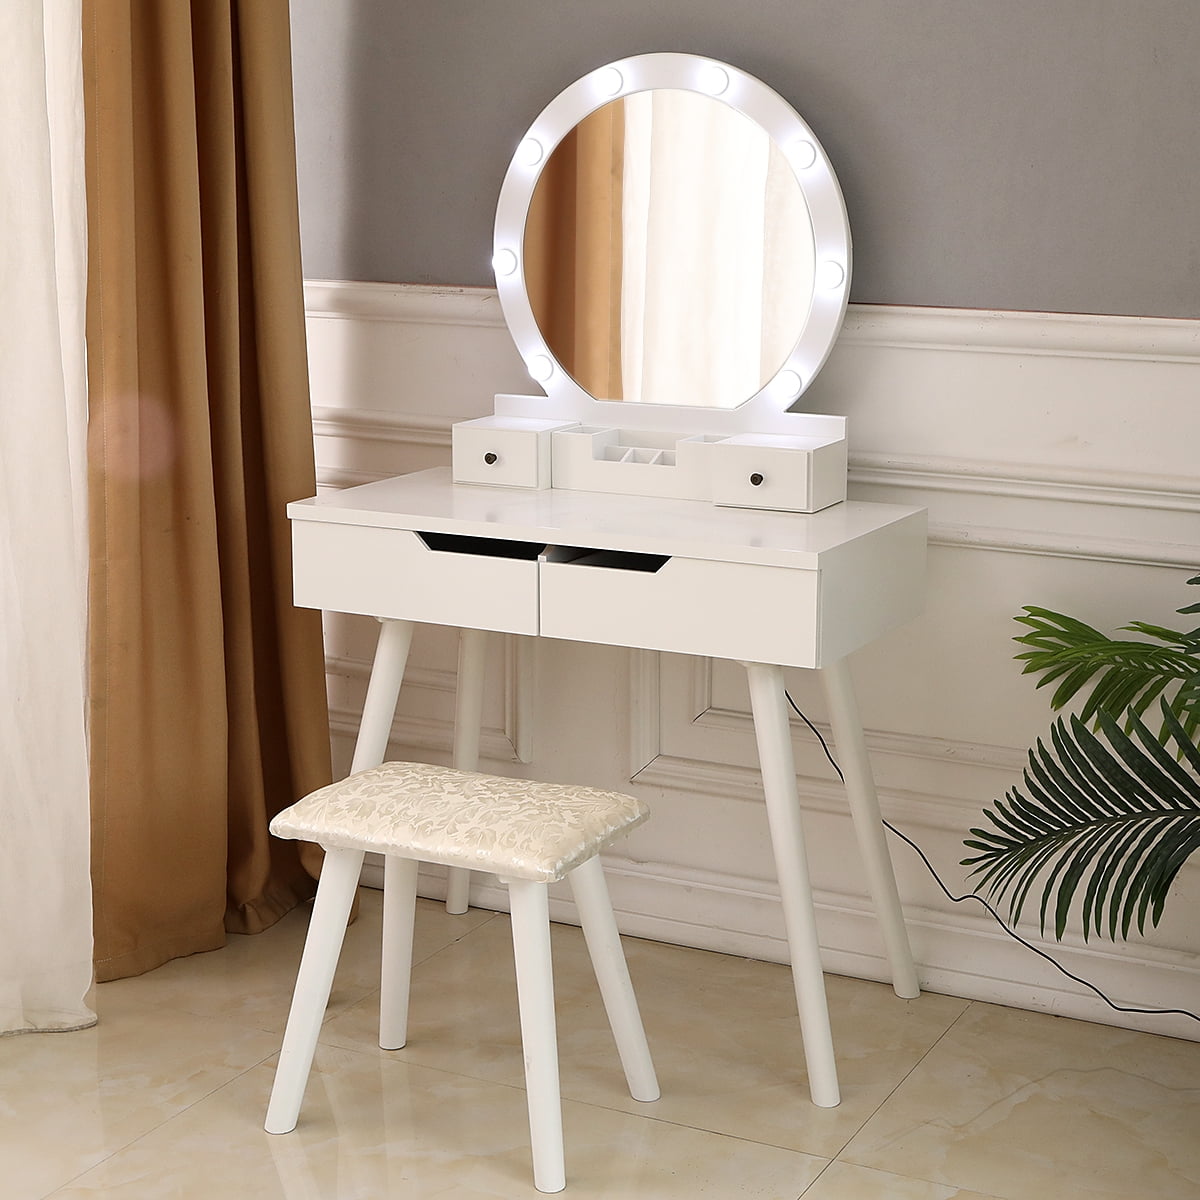 Ktaxon Vanity Set With Round Lighted, Vanity Makeup Table Mirror With Lights